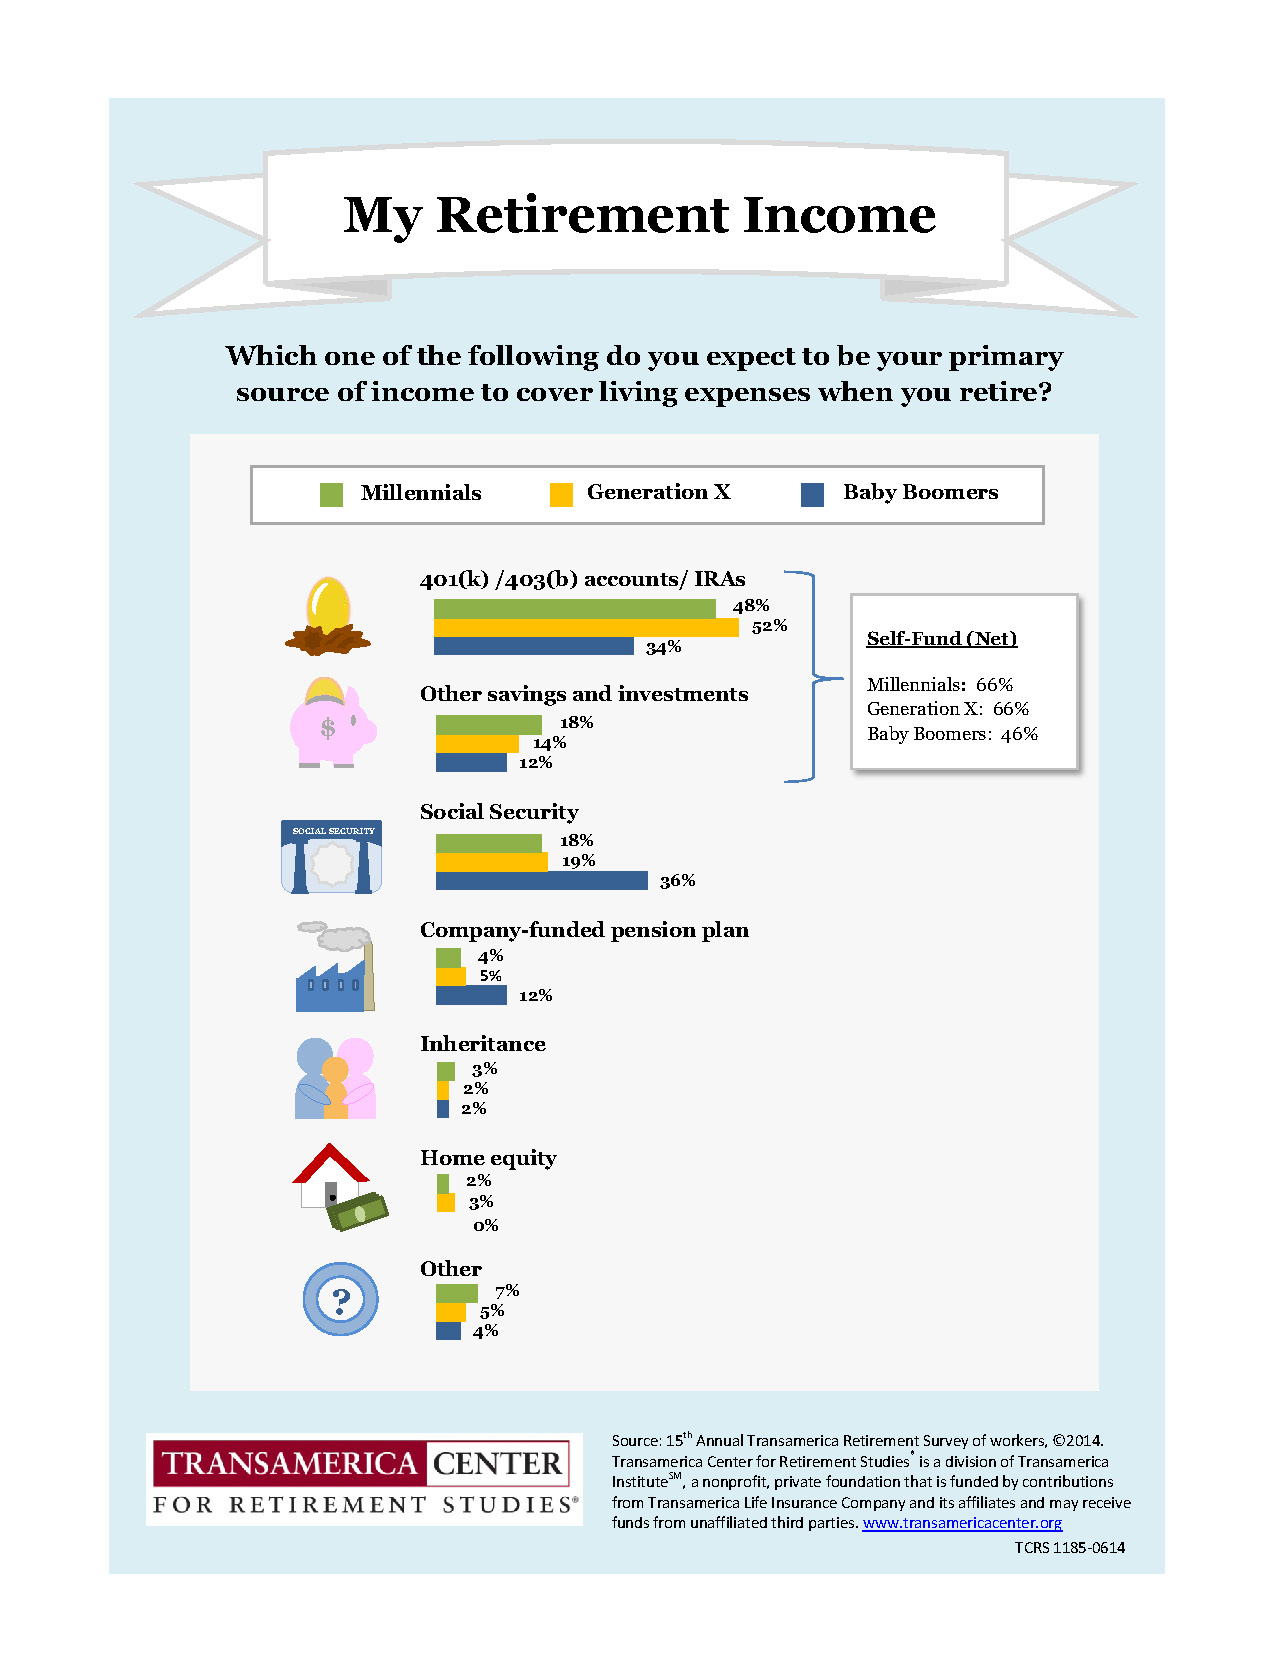 TCRS2013_I_Primary_Source_of_Retirement_Income